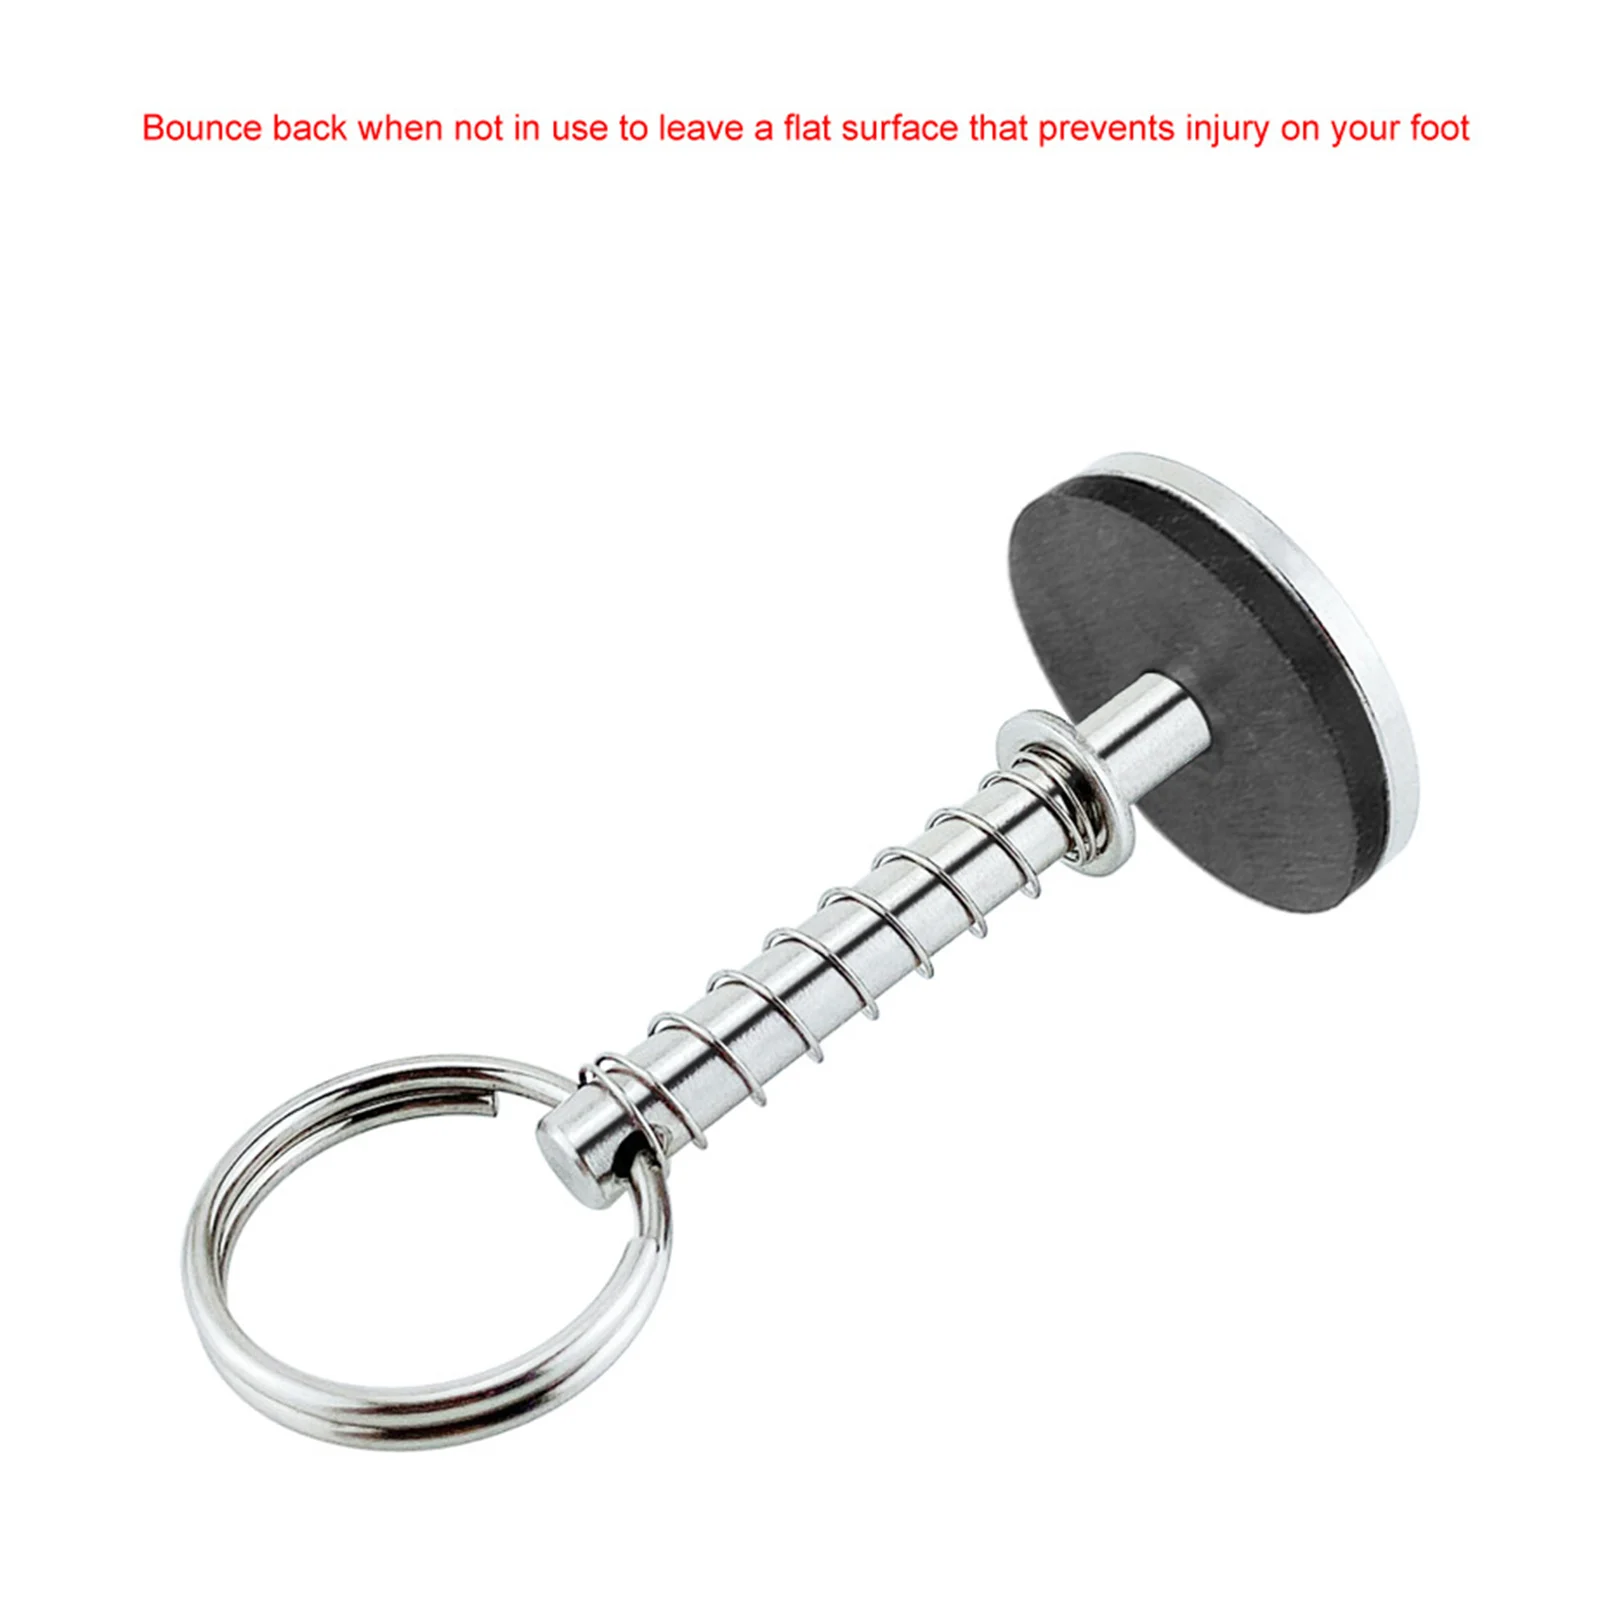 Stainless Steel Boat Hatch Cover Pull Button with Spring Hidden Pull Pin Lifter for Engine Cover Floor Storage Loft Ladders